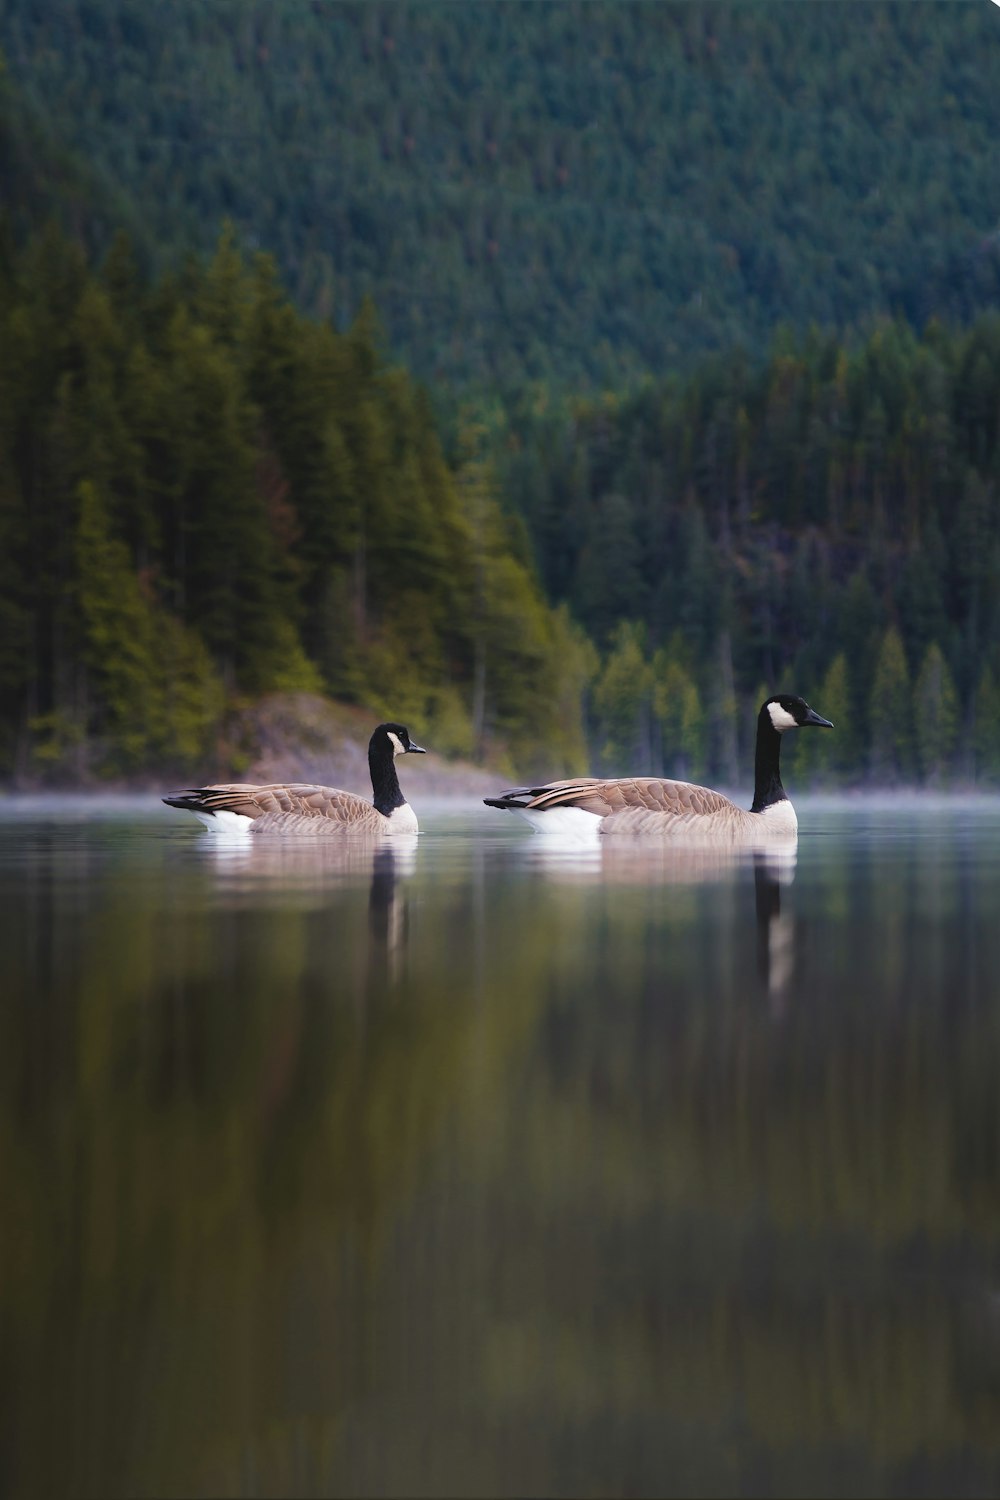 two Canada geese on body of water during daytime